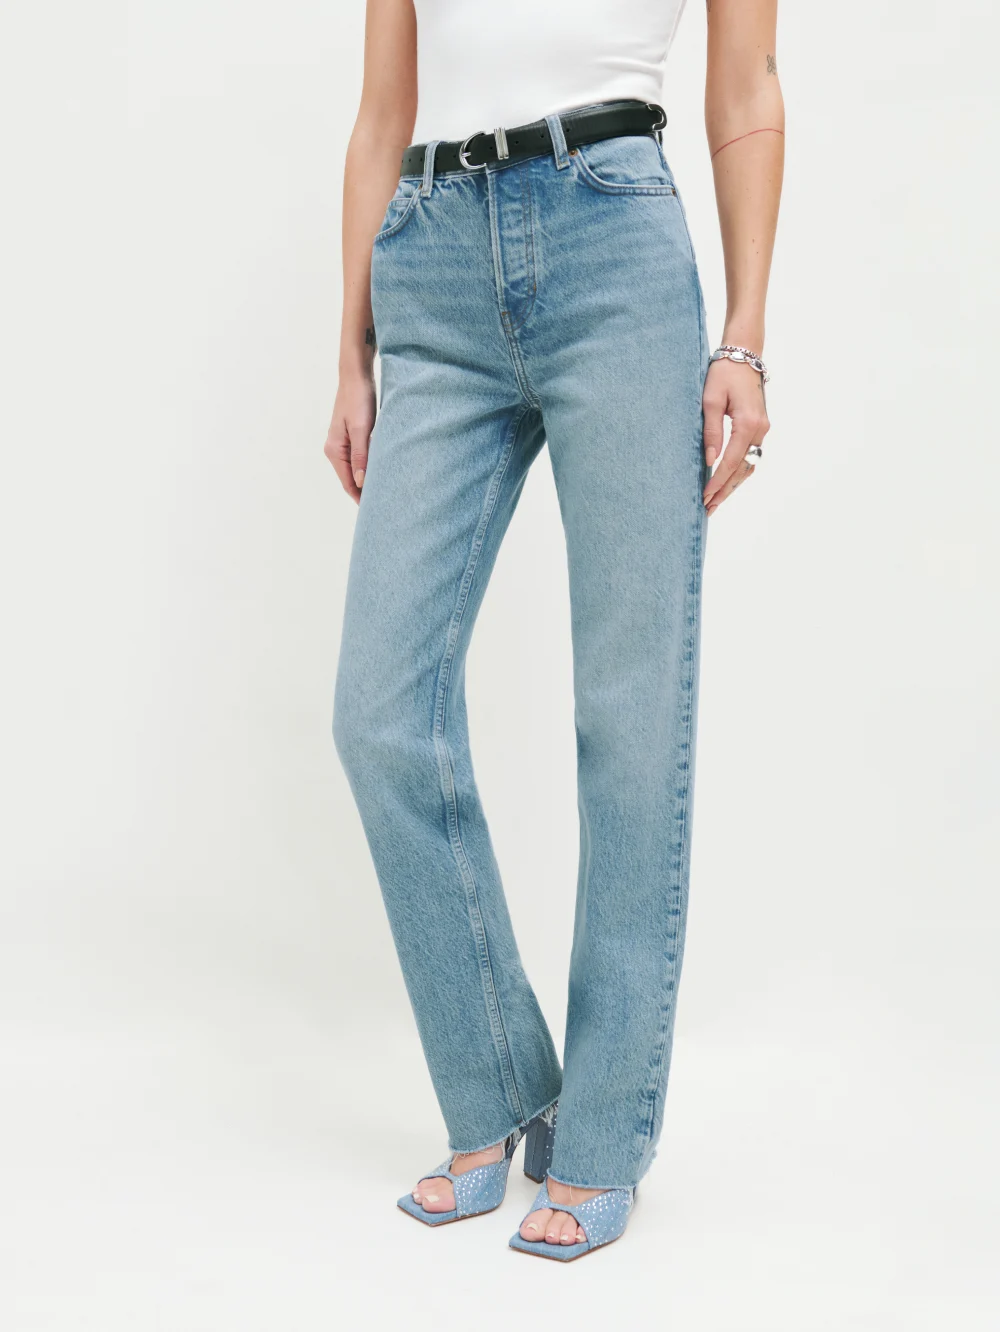 Finding The Best Full-Length Jeans For Tall Women (Try-On) - The Mom Edit